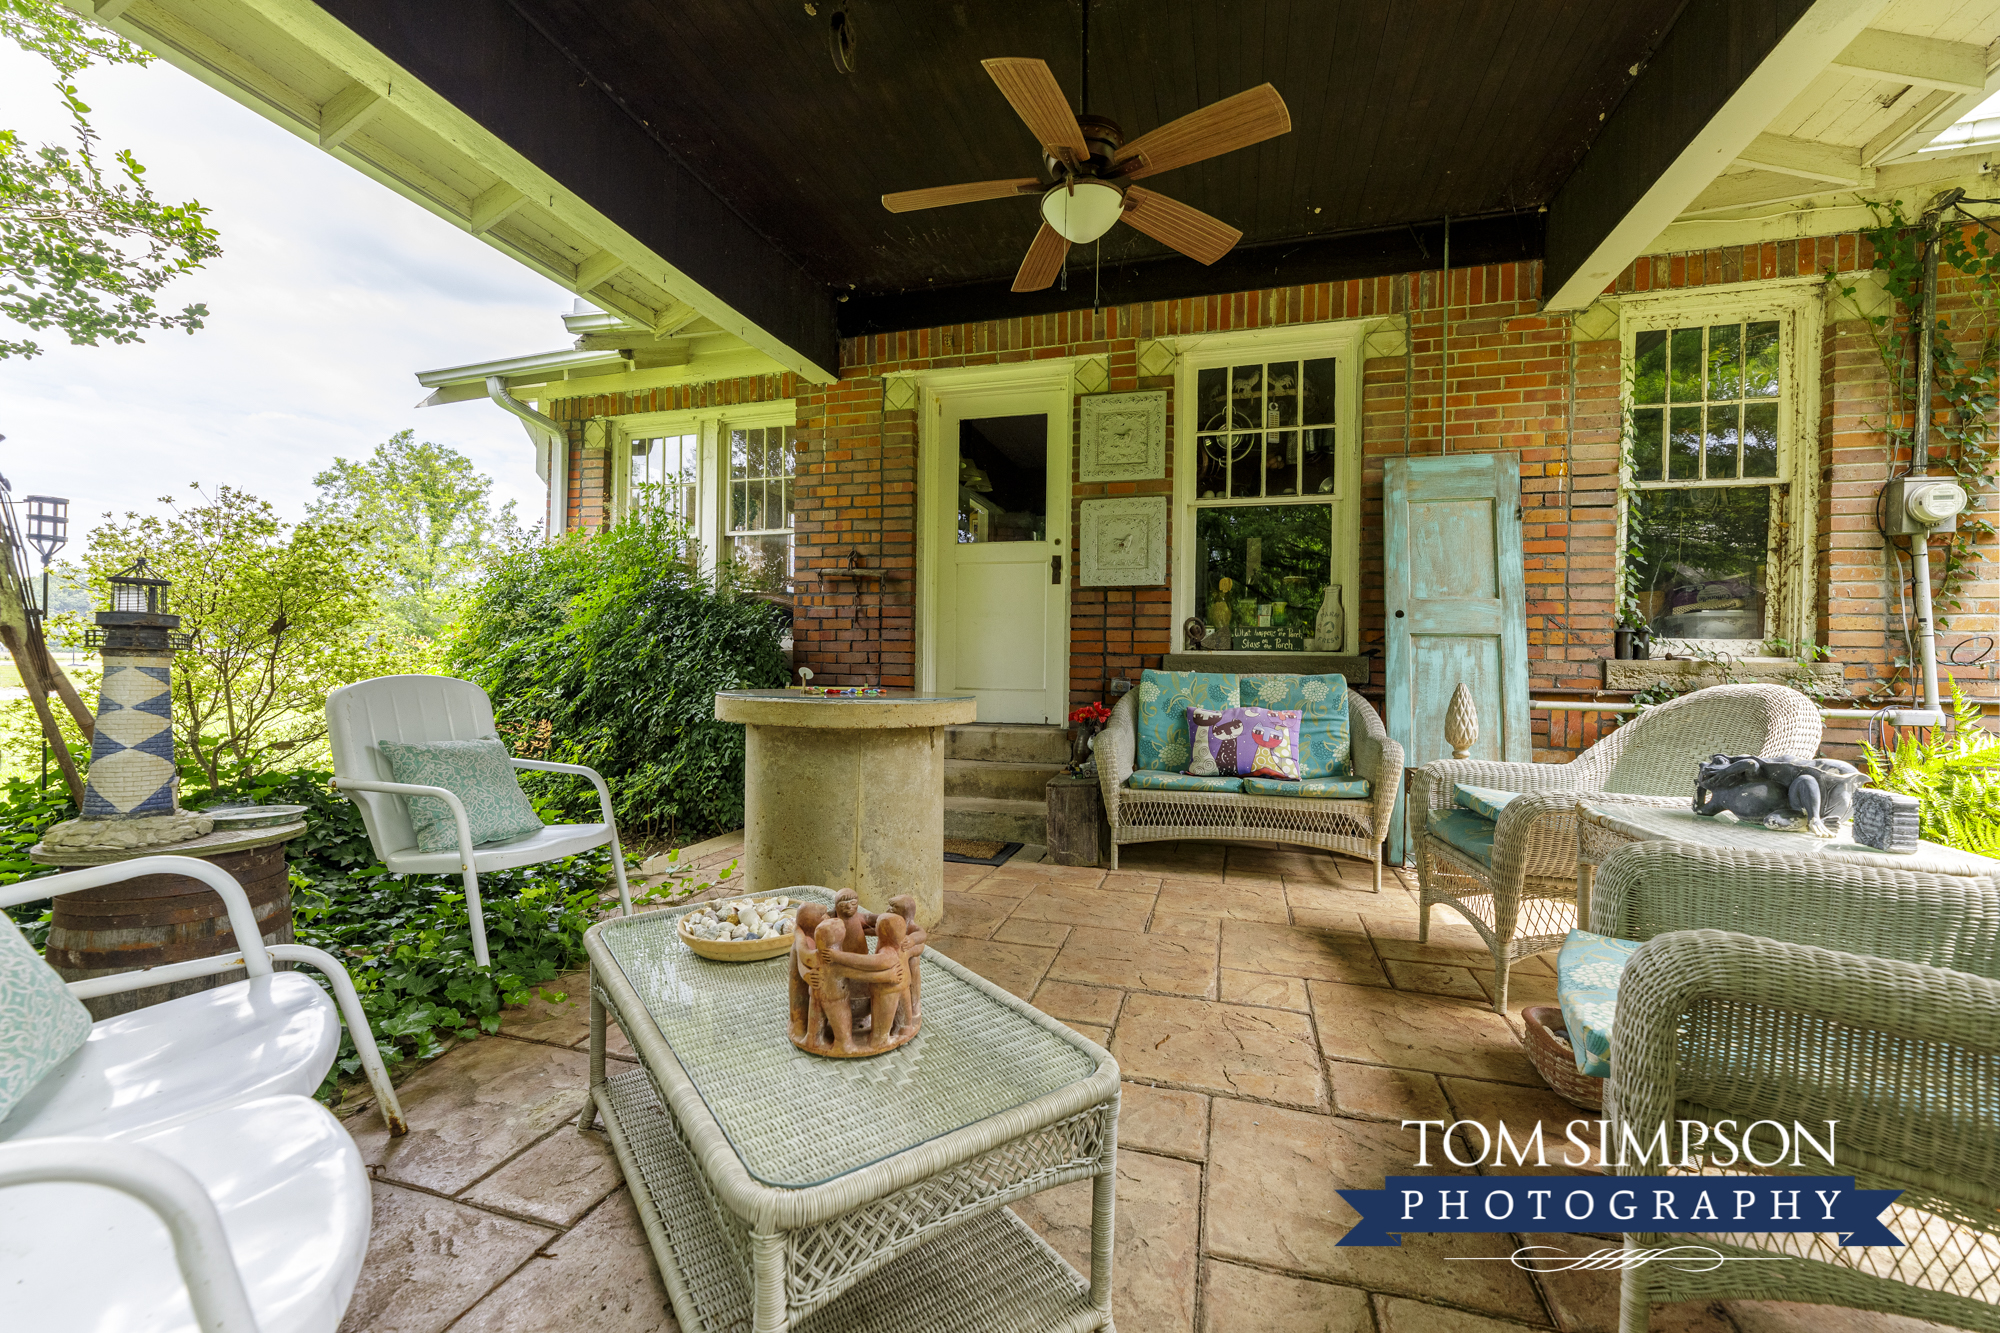 guests find wicker seating on the porch